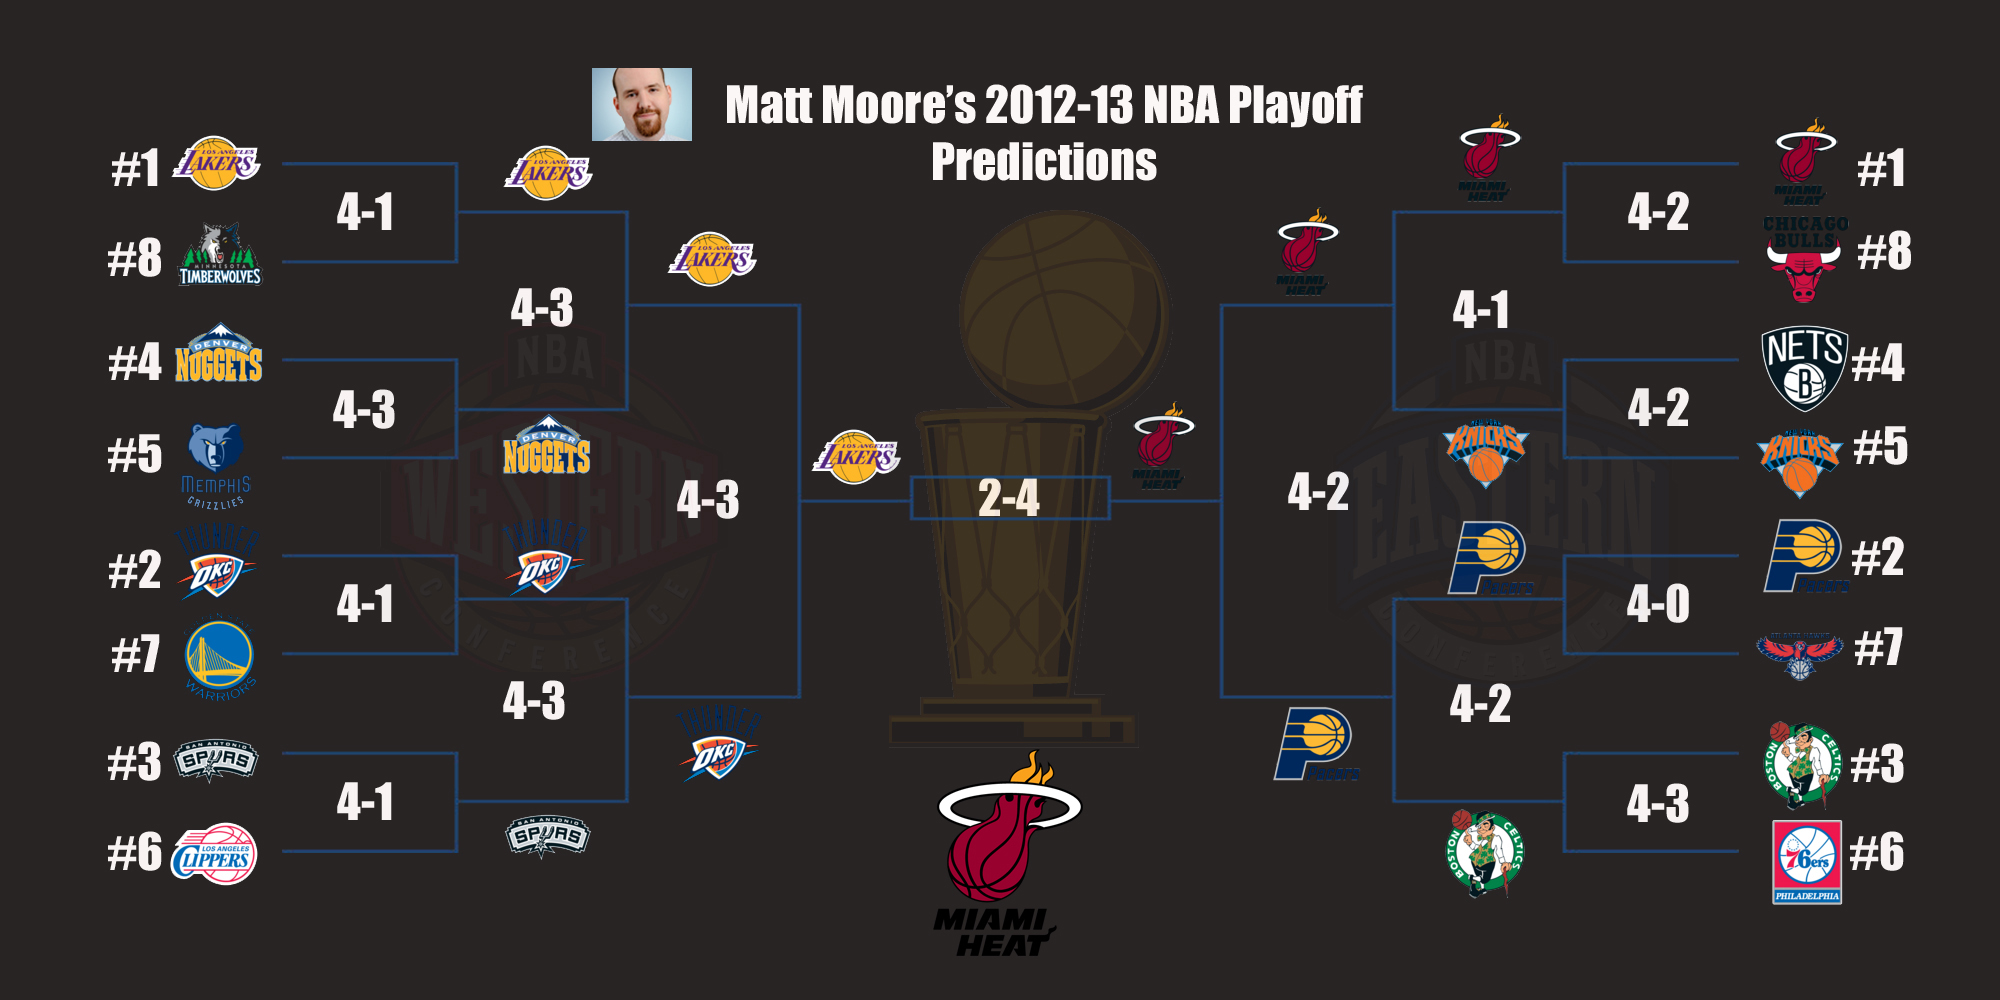 what is the 2012 nba playoff schedule